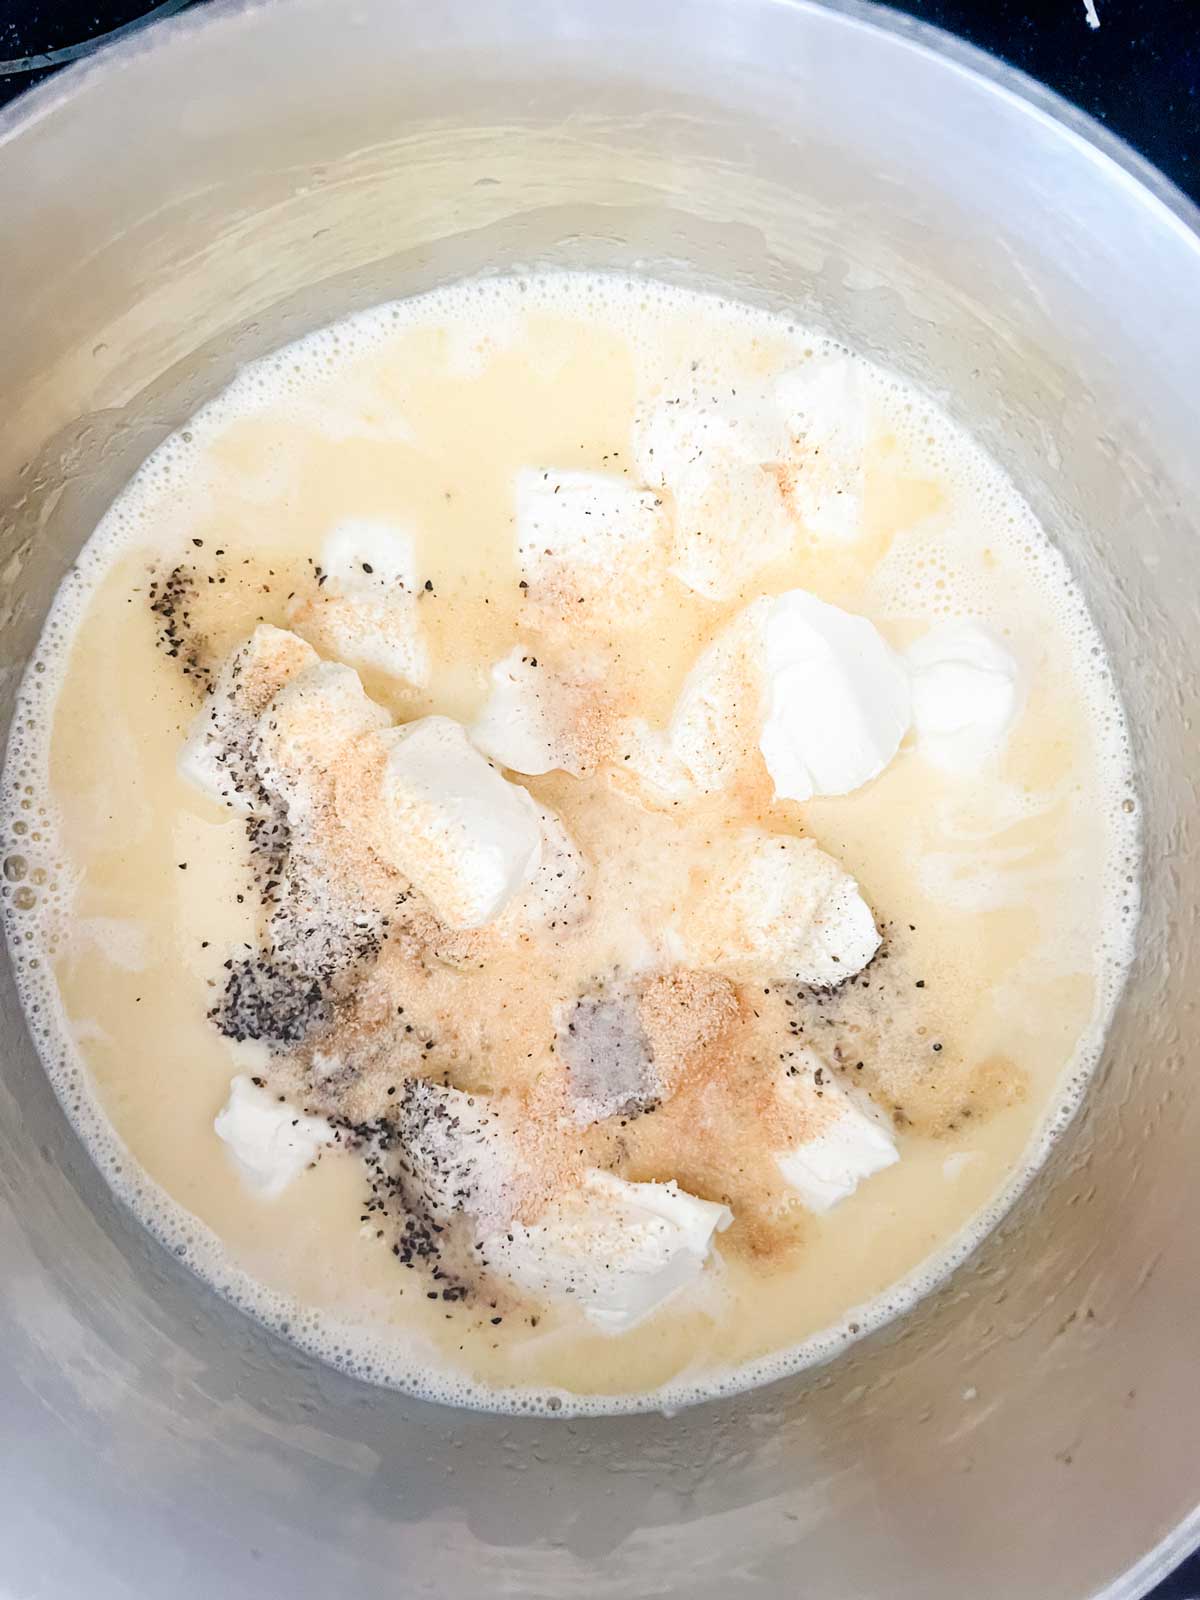 Photo of cream, butter, cream cheese, and seasonings in a saucepan.